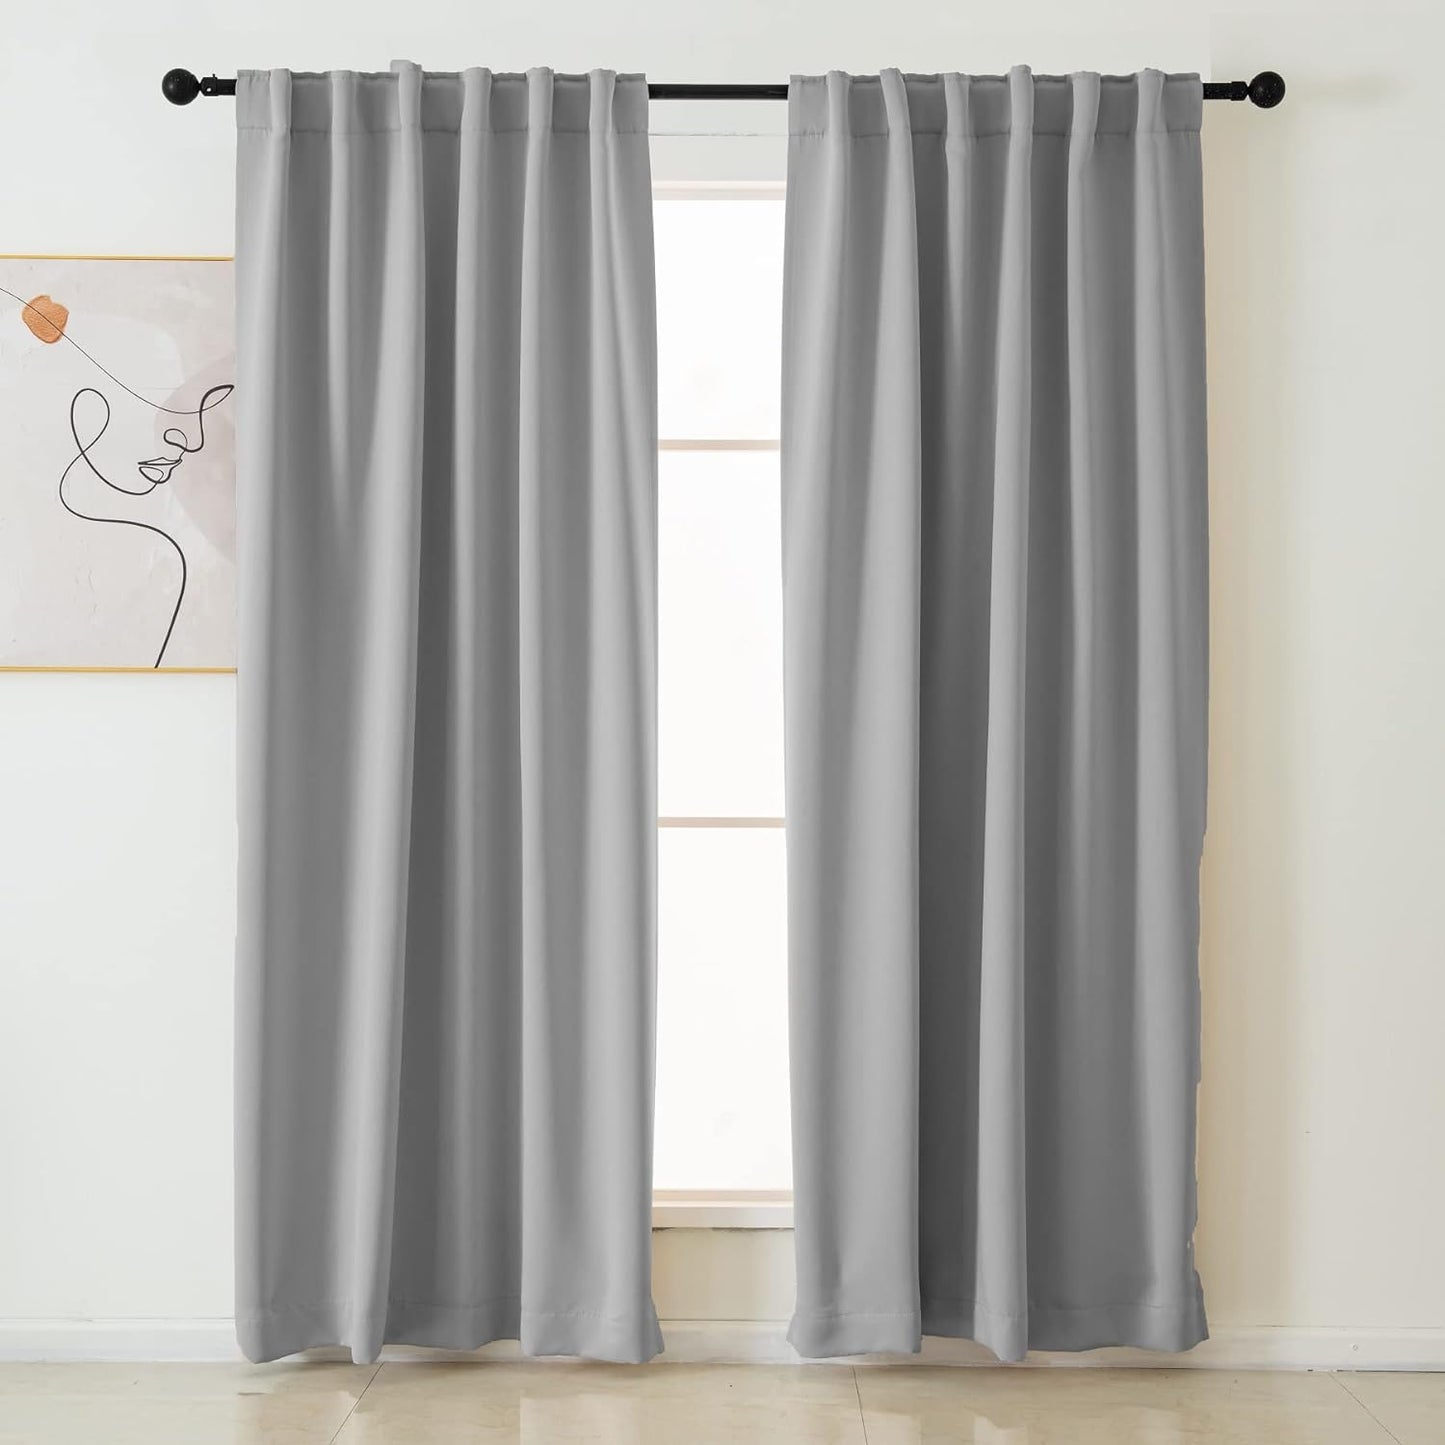 Pickluc Blackout Curtains 96 Inches Long 2 Panels, Black Out Drapes for Bedroom or Living Room, Back Tab and Rod Pocket Top, Set of Two, Dark Grey, 52" Wide and 96" Length.  Pickluc Light Grey 52"W X 96"L 